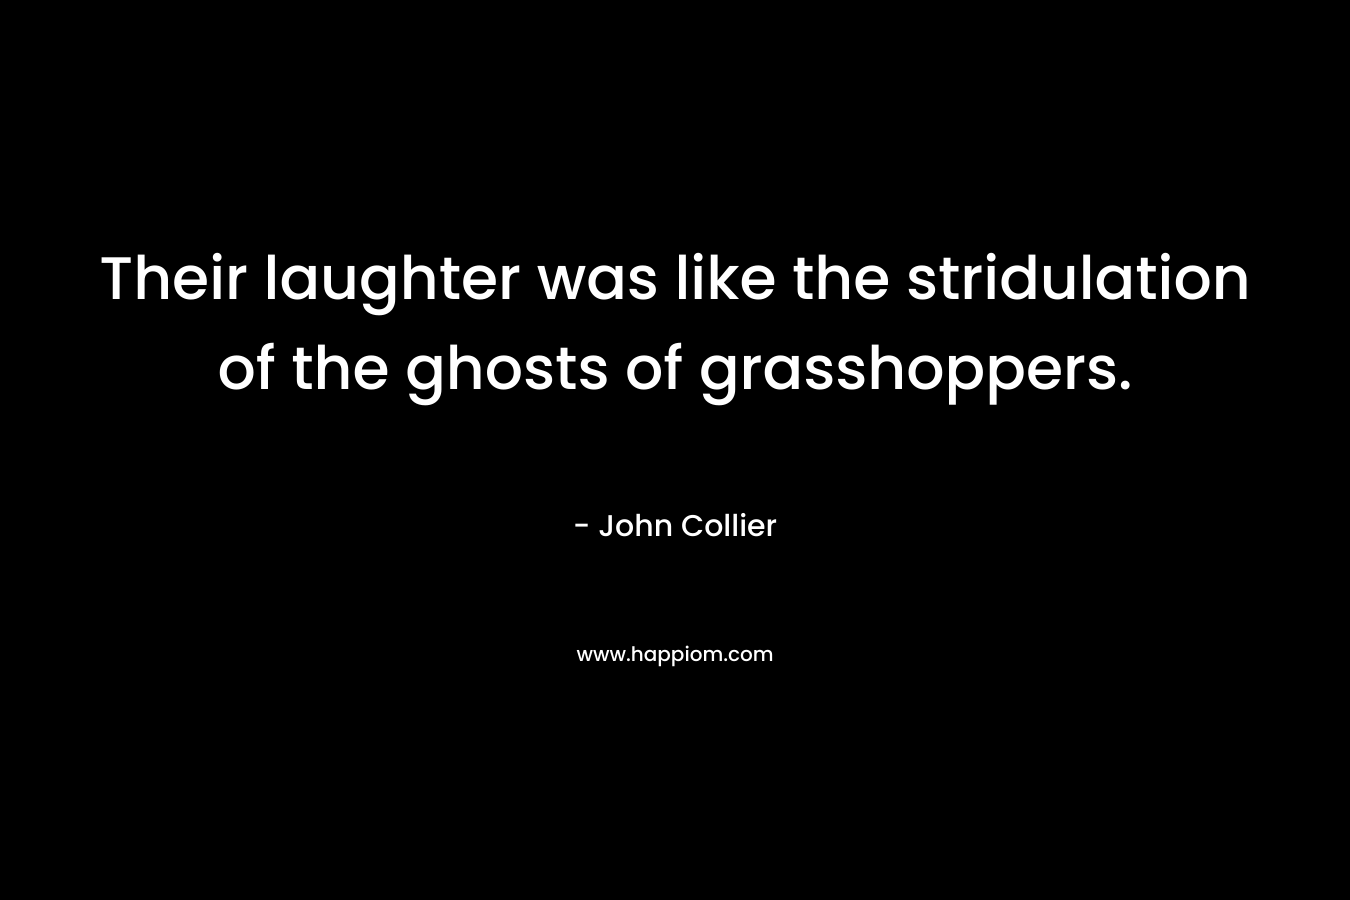 Their laughter was like the stridulation of the ghosts of grasshoppers. – John Collier